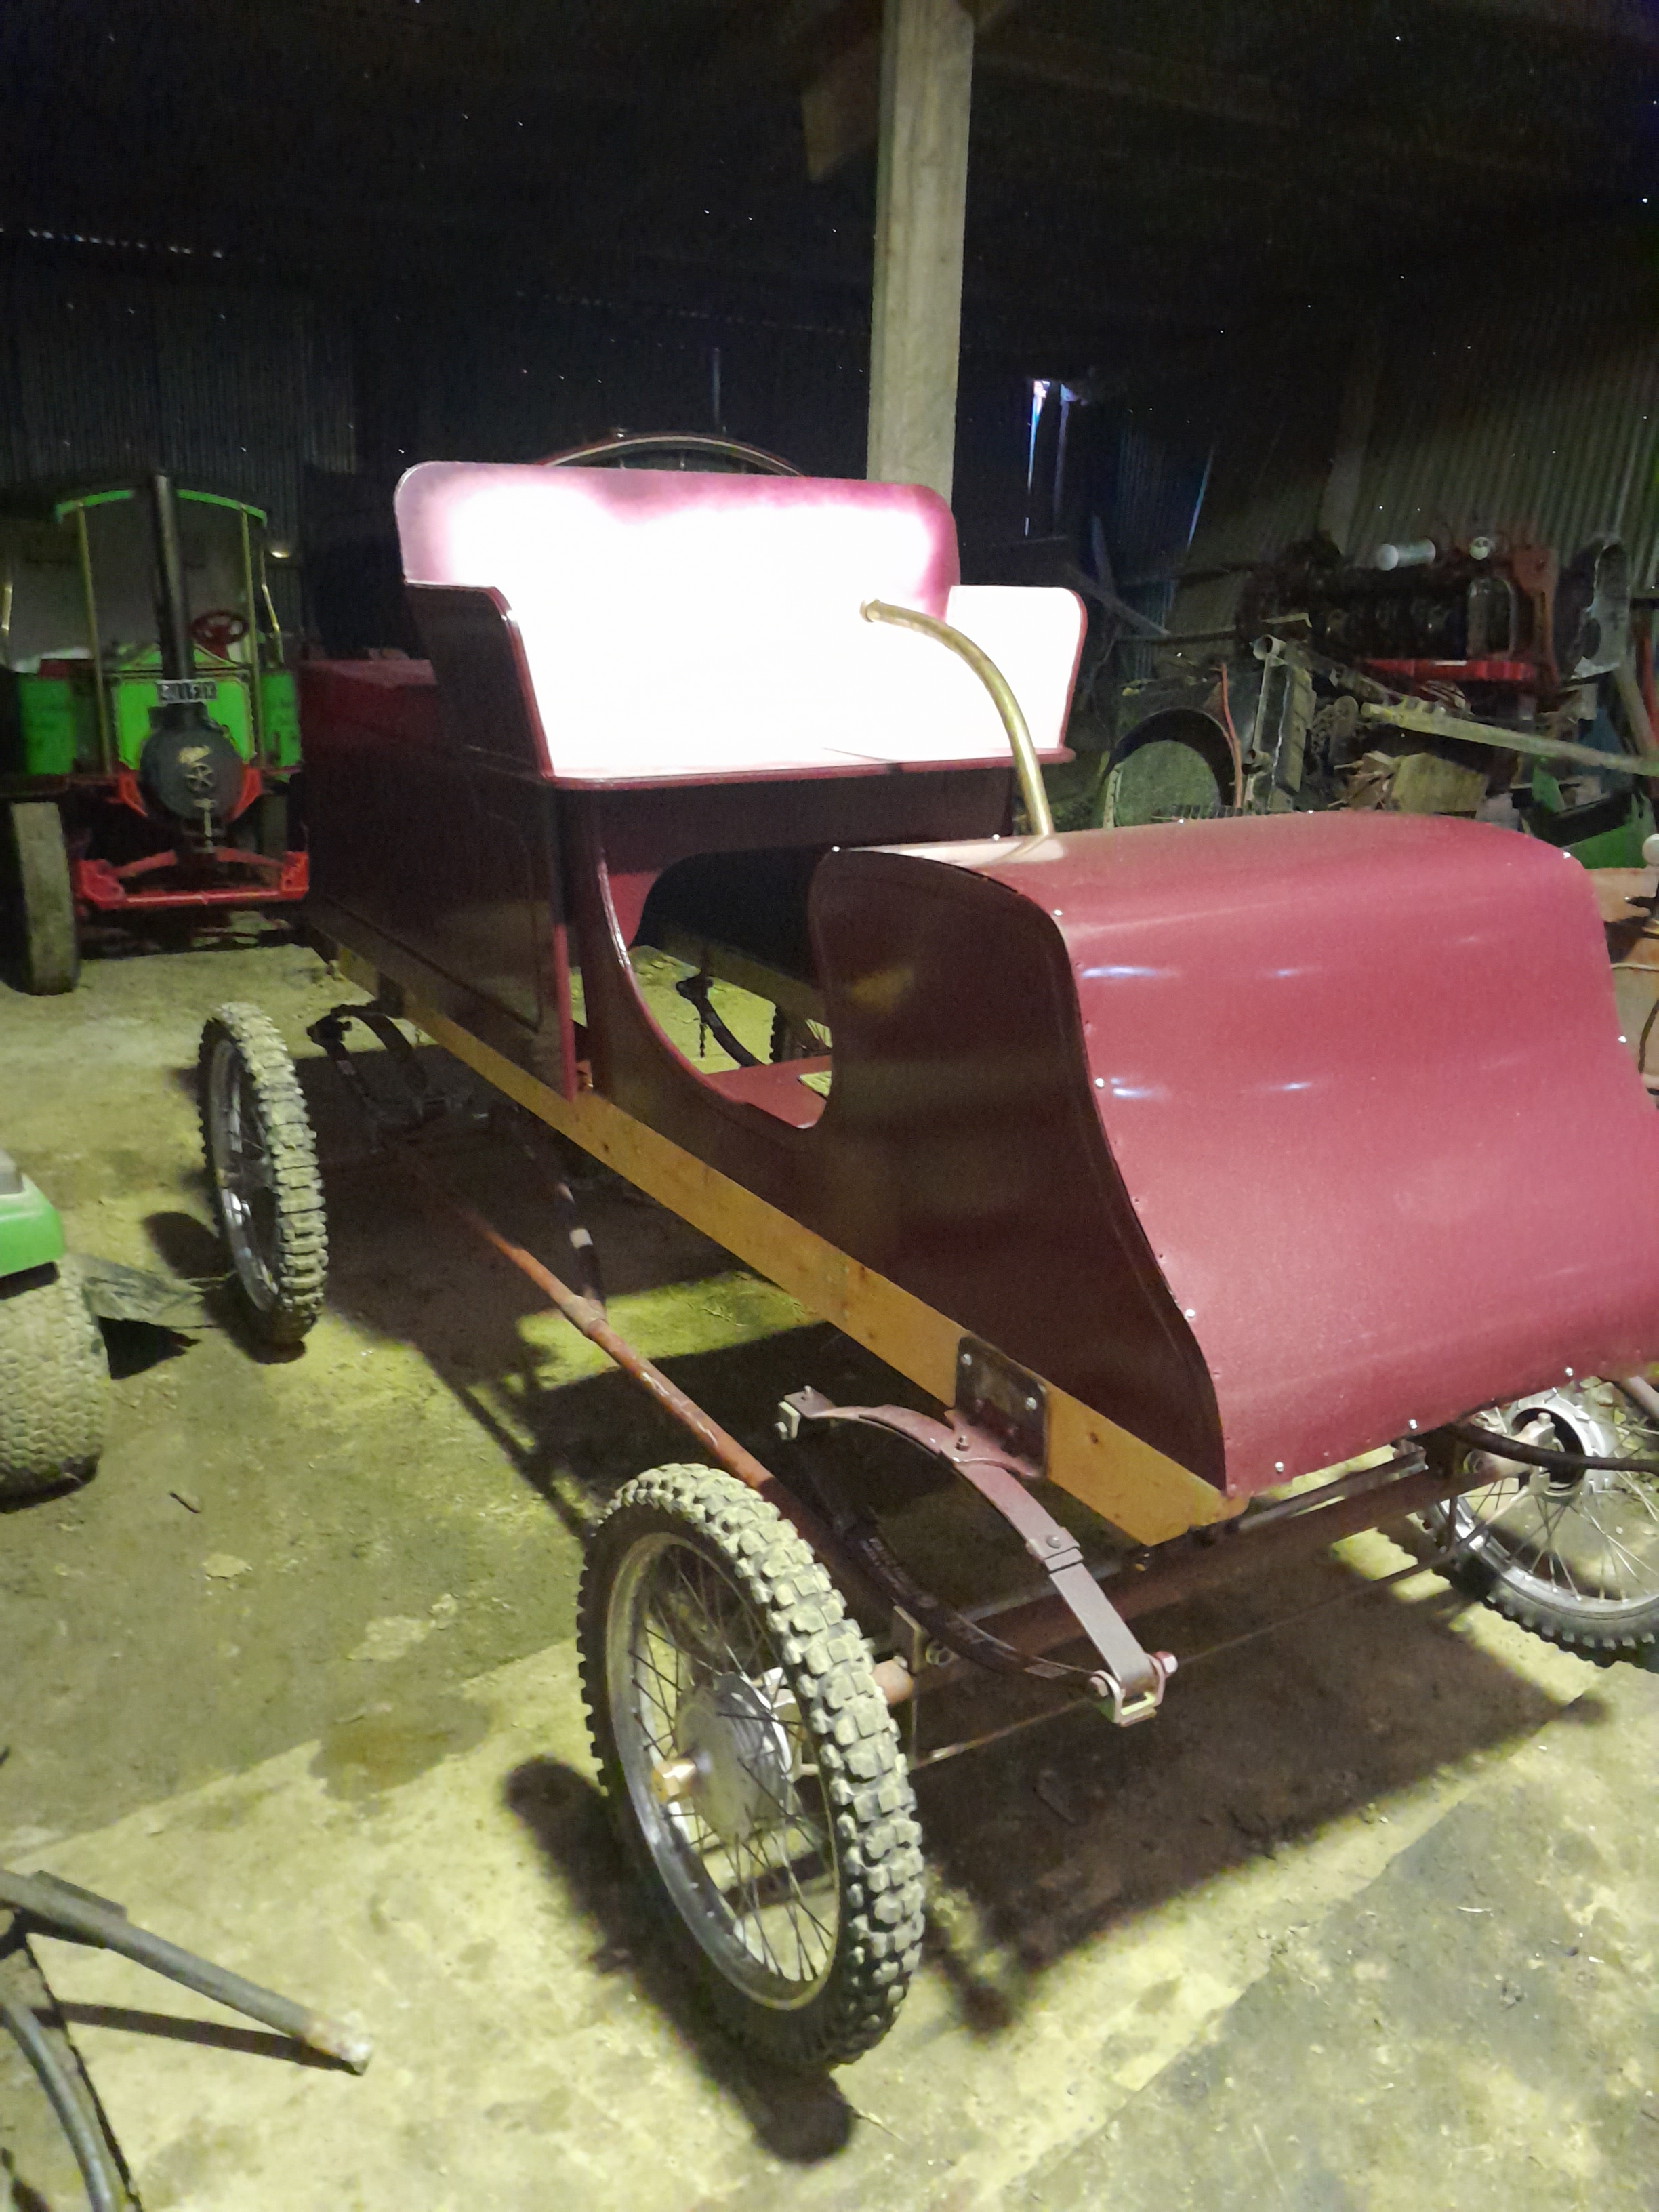 My cousin is building a steam car